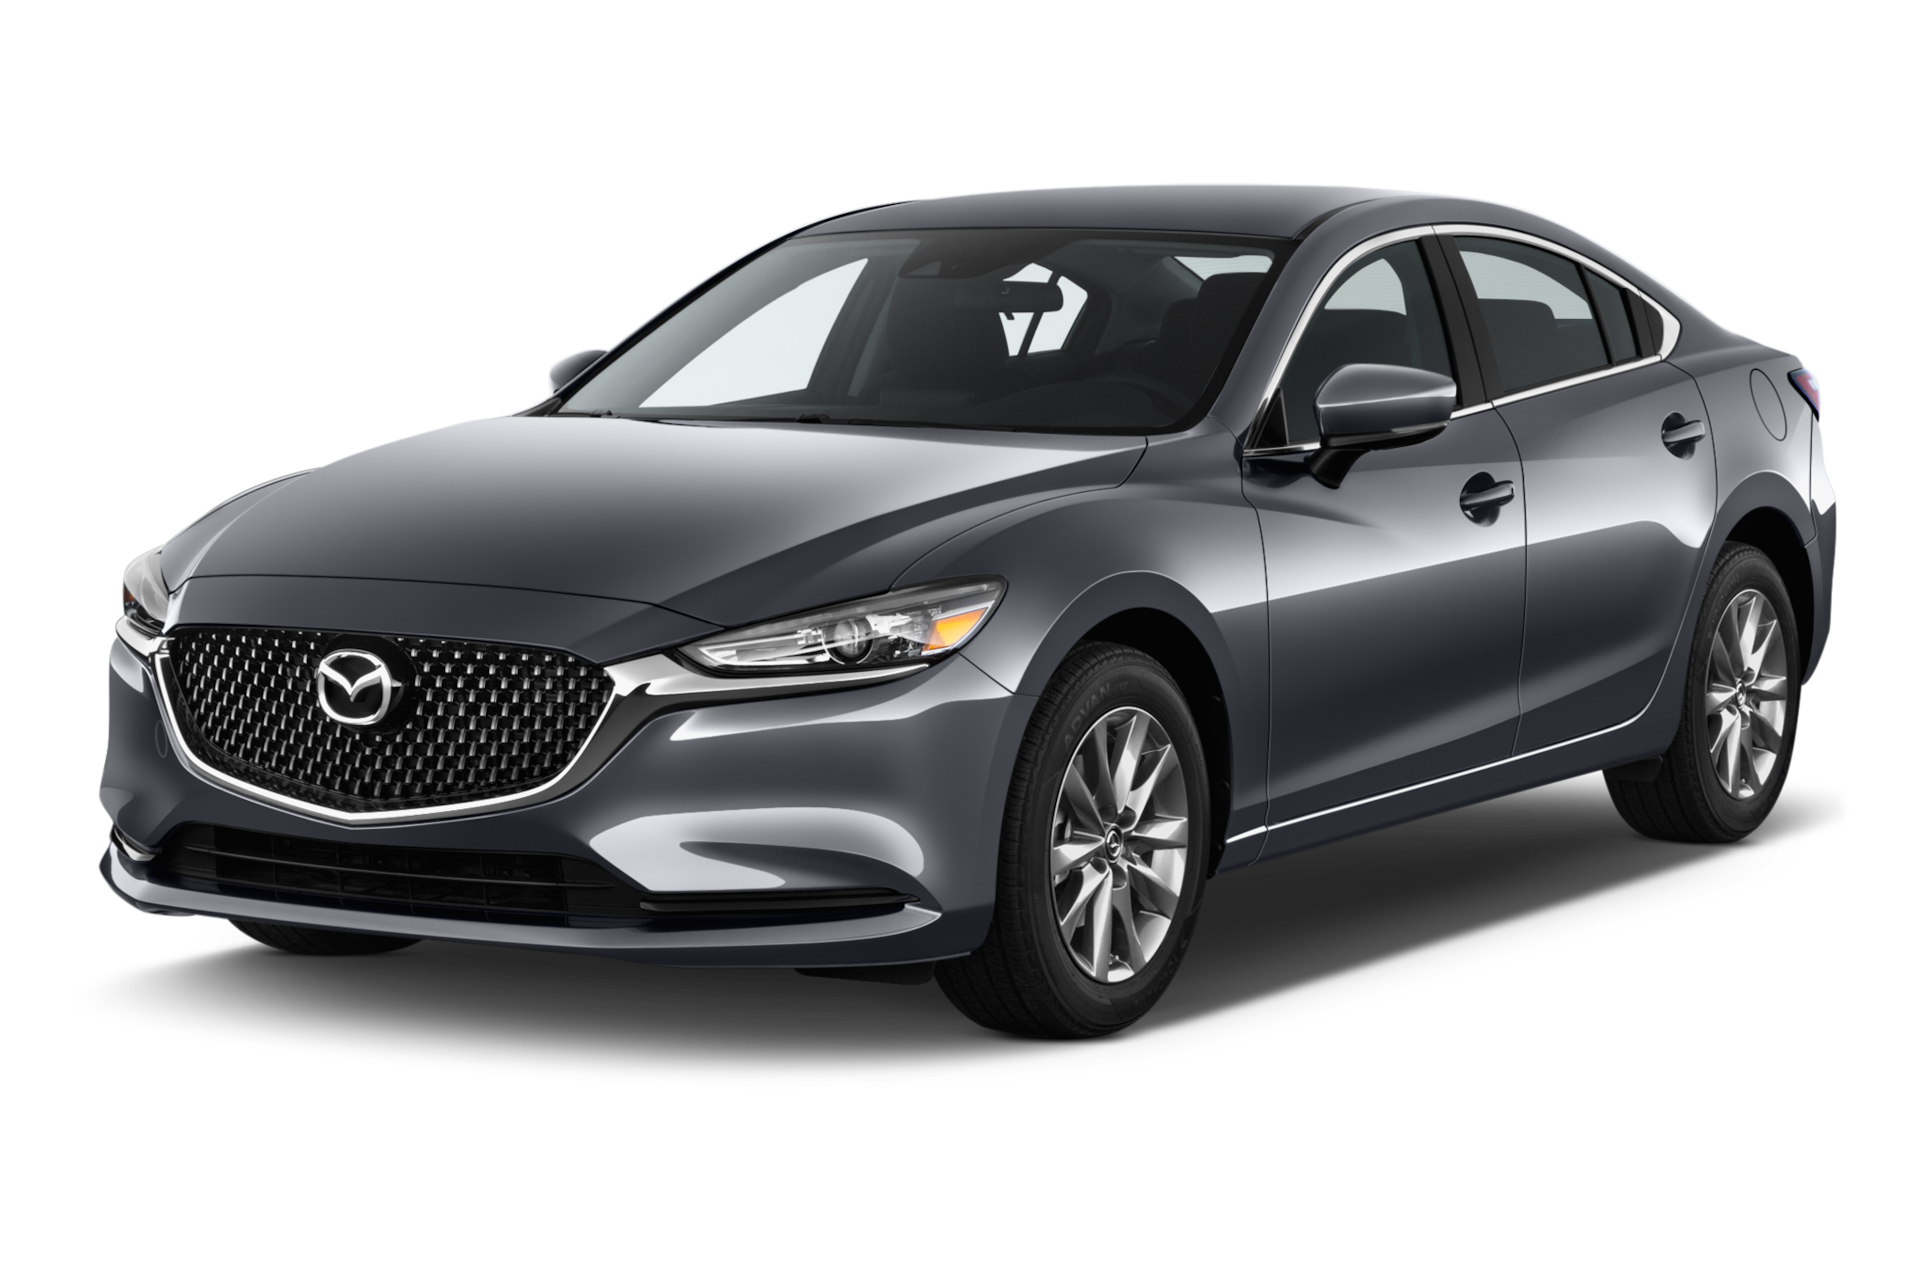 2020 Mazda Mazda6 Prices, Reviews, and Photos - MotorTrend